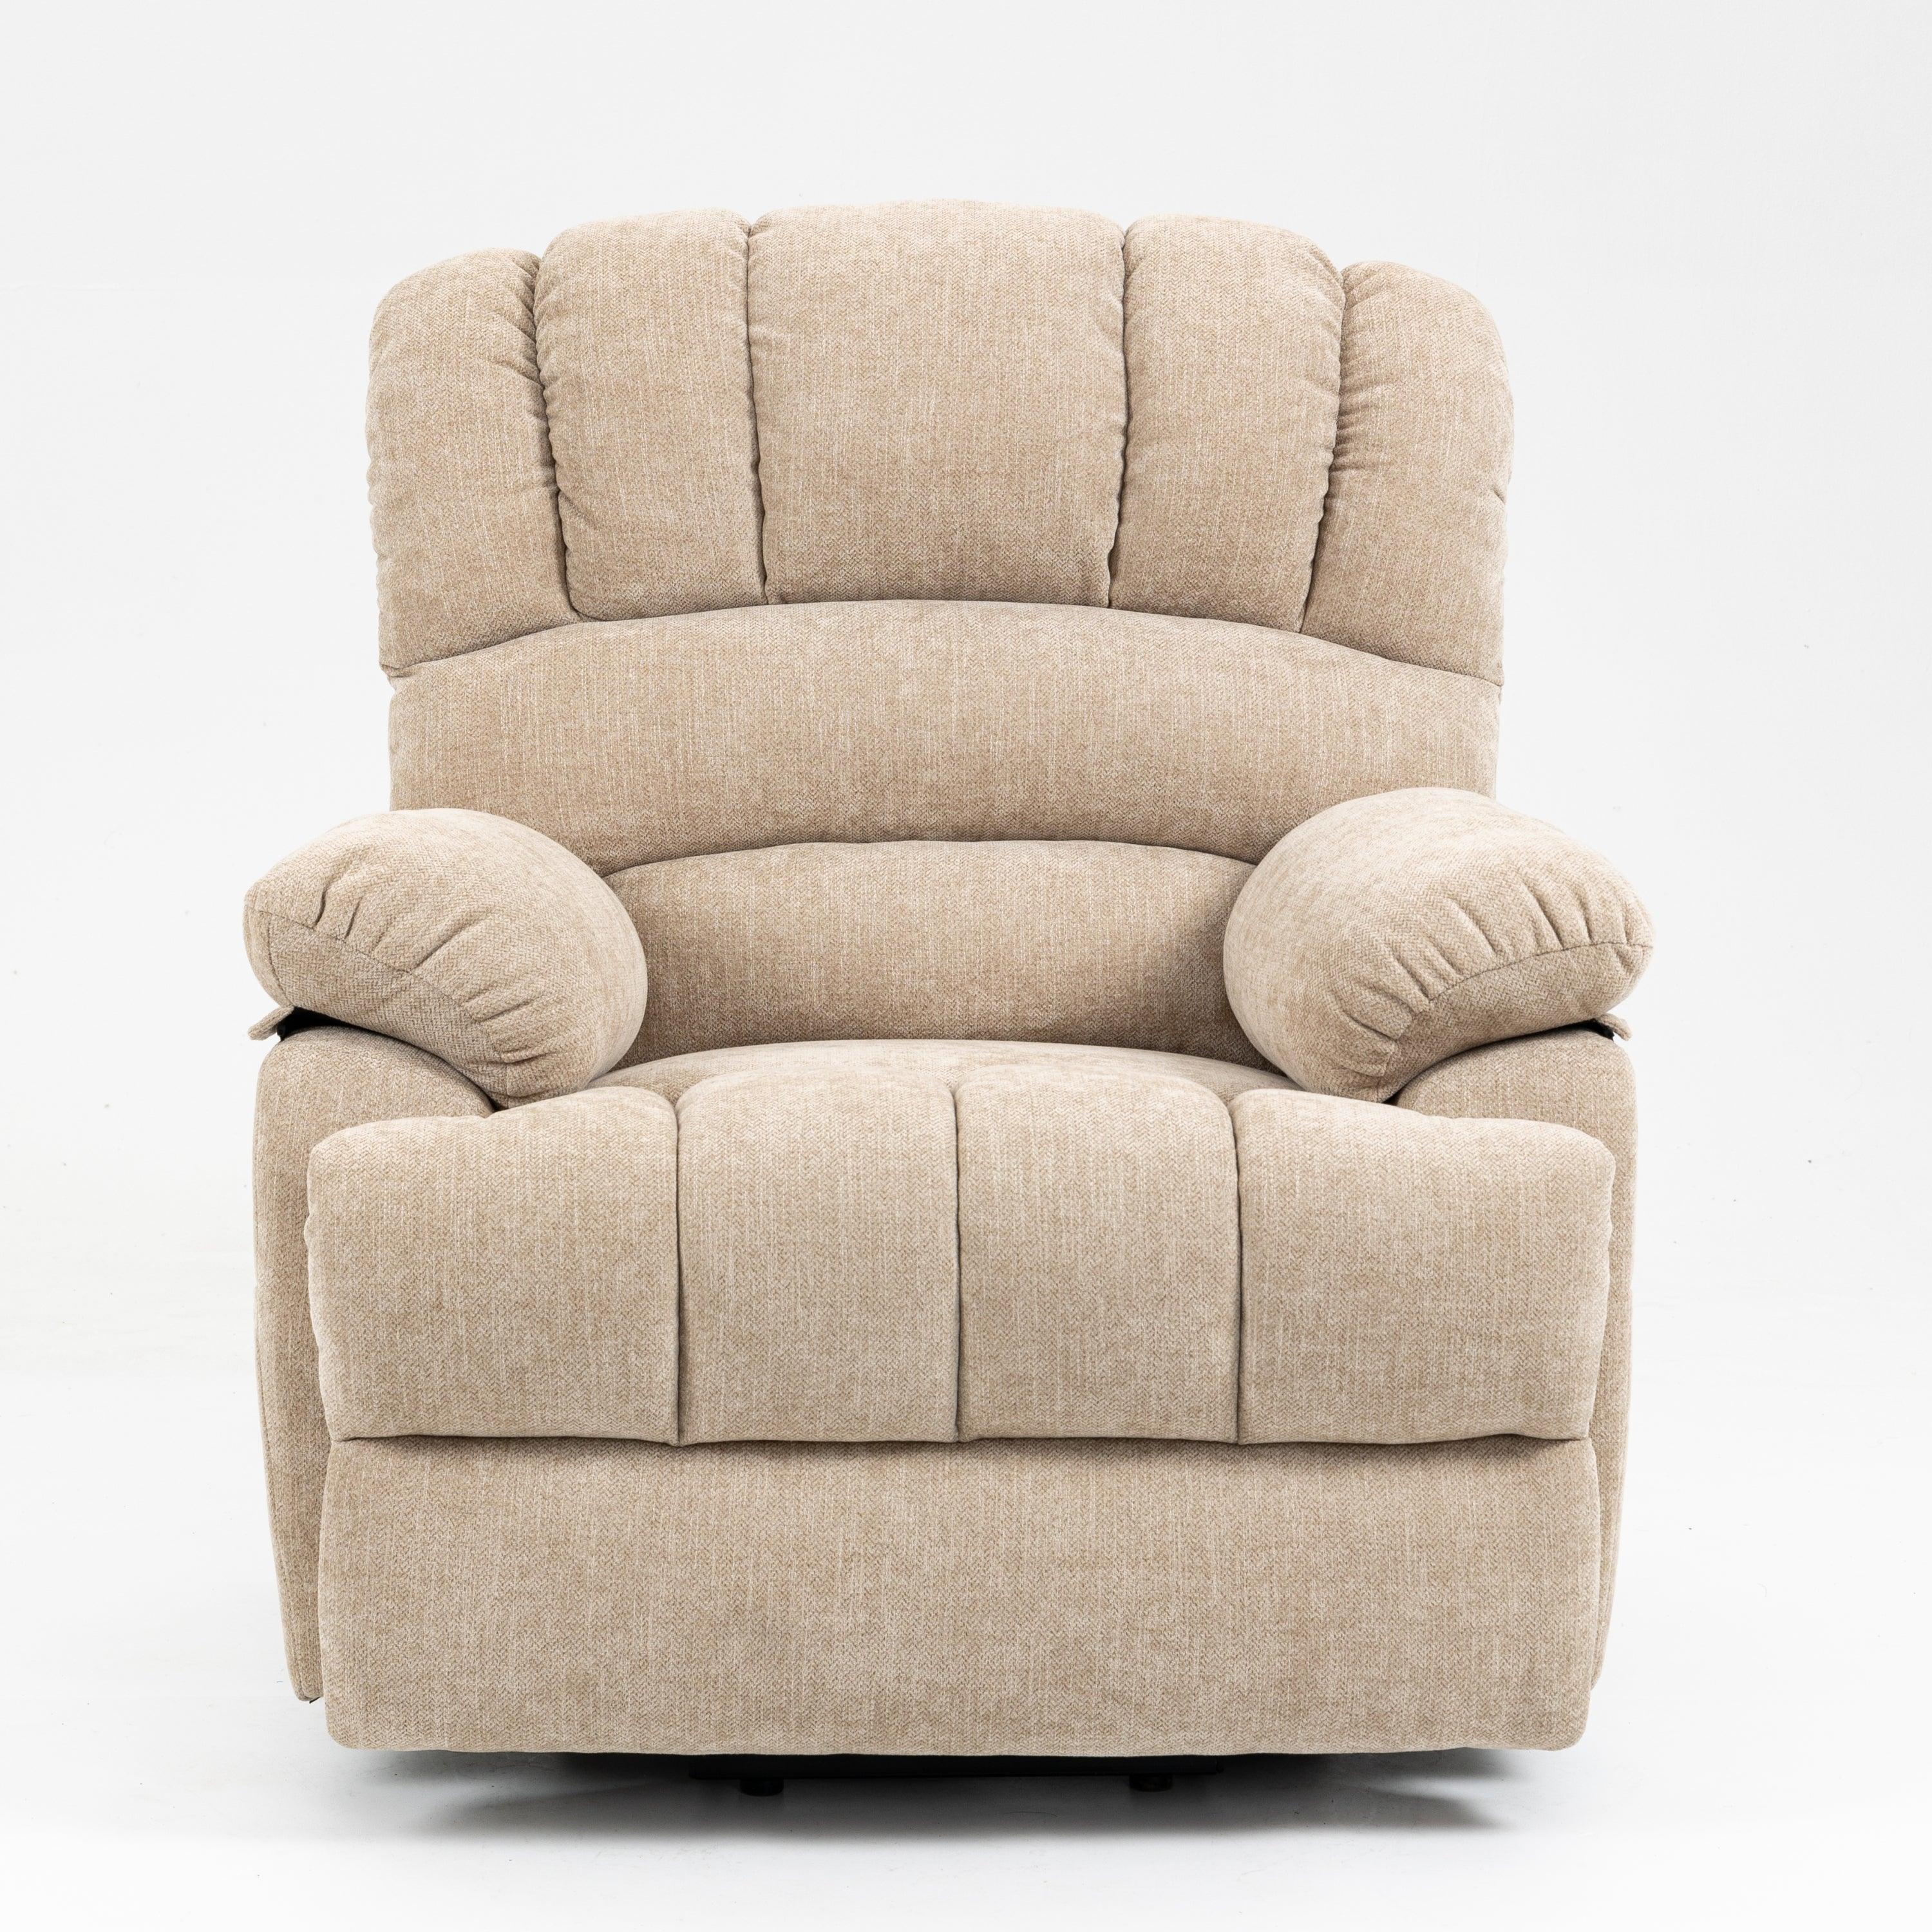 Large Power Lift Recliner Chair with Heat and Massage, seated front view